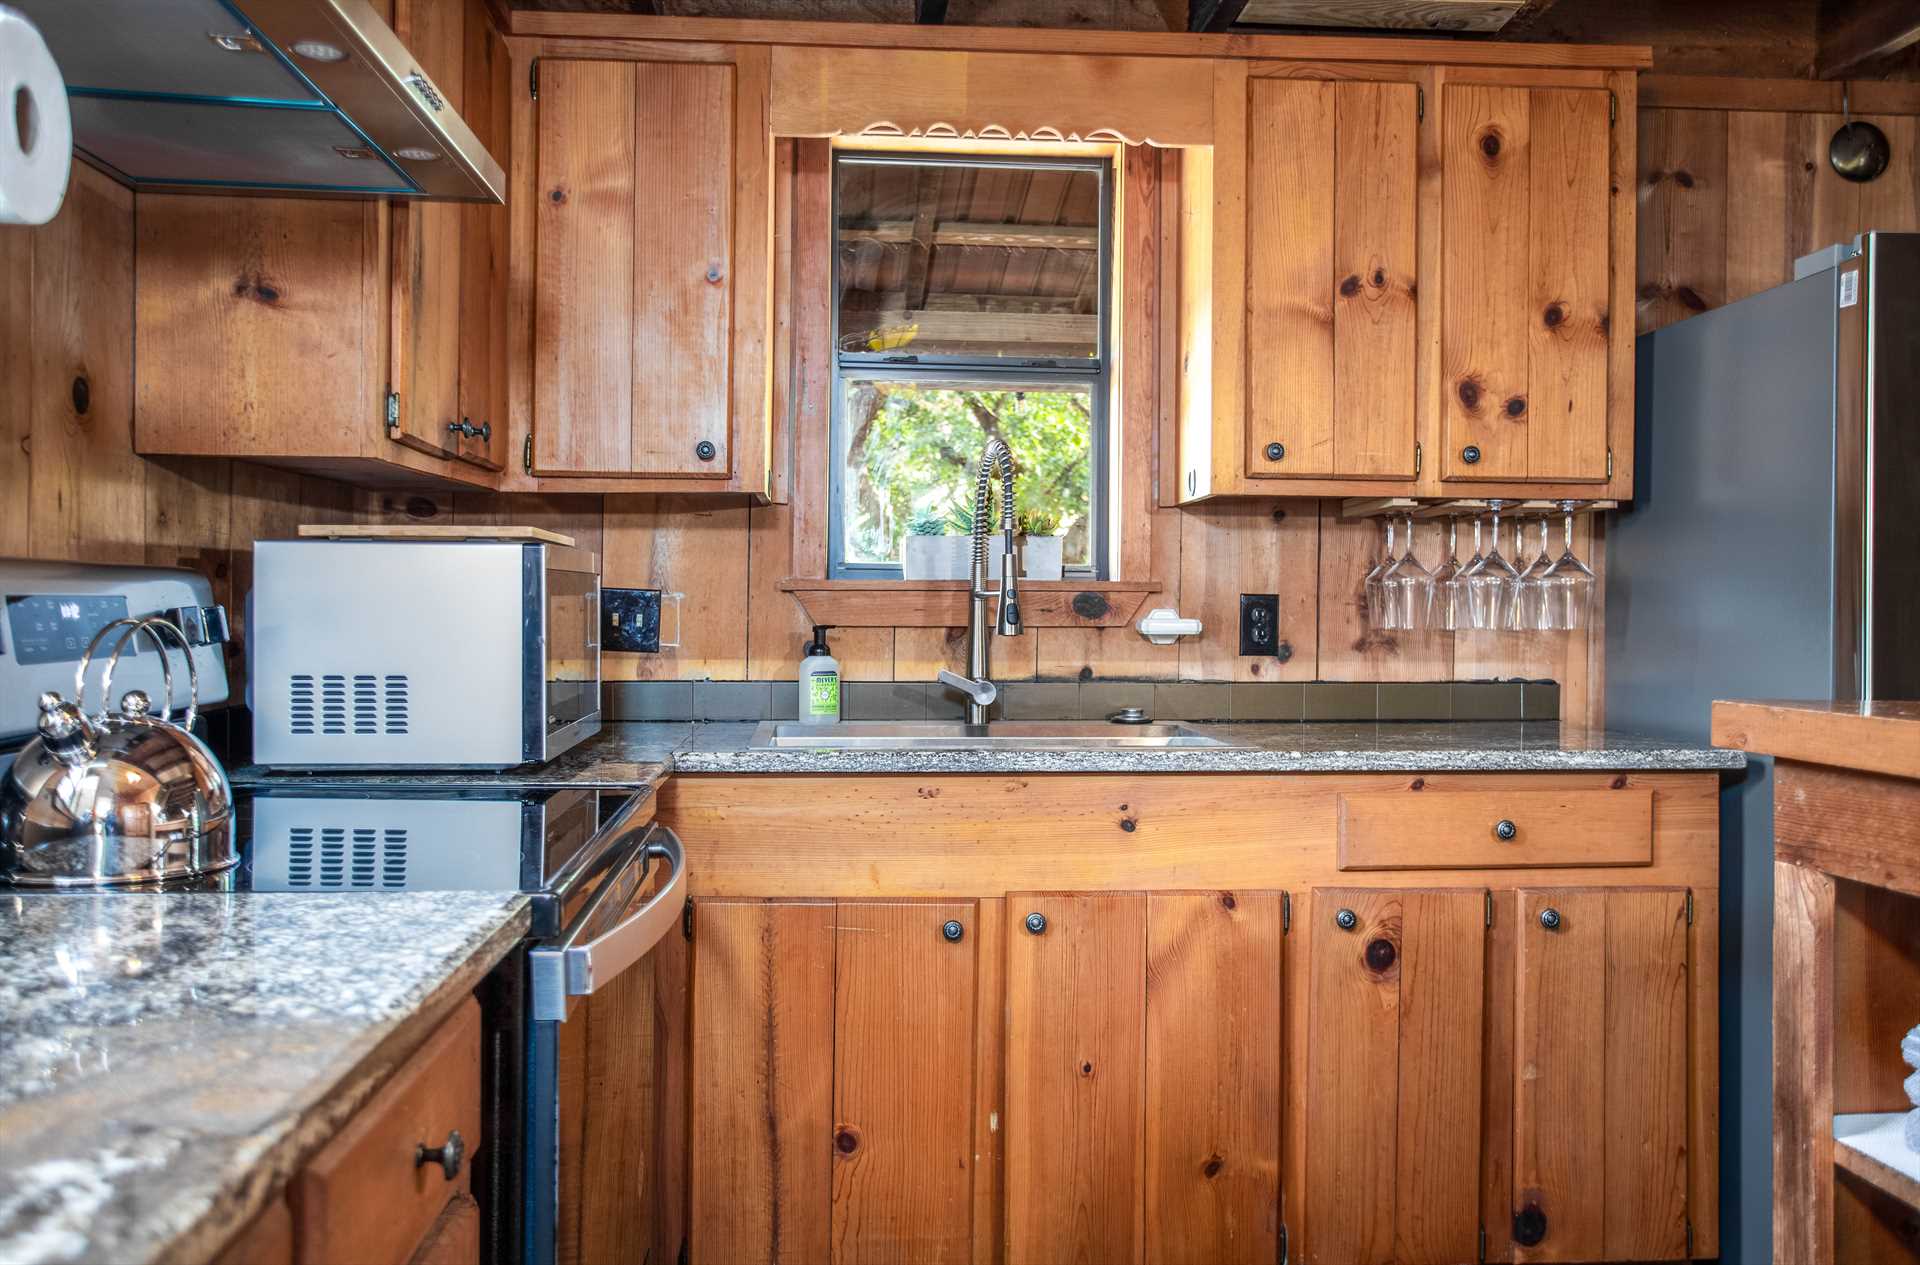                                                 Rustic woodwork gives the farmhouse kitchen a warm and authentic western look.